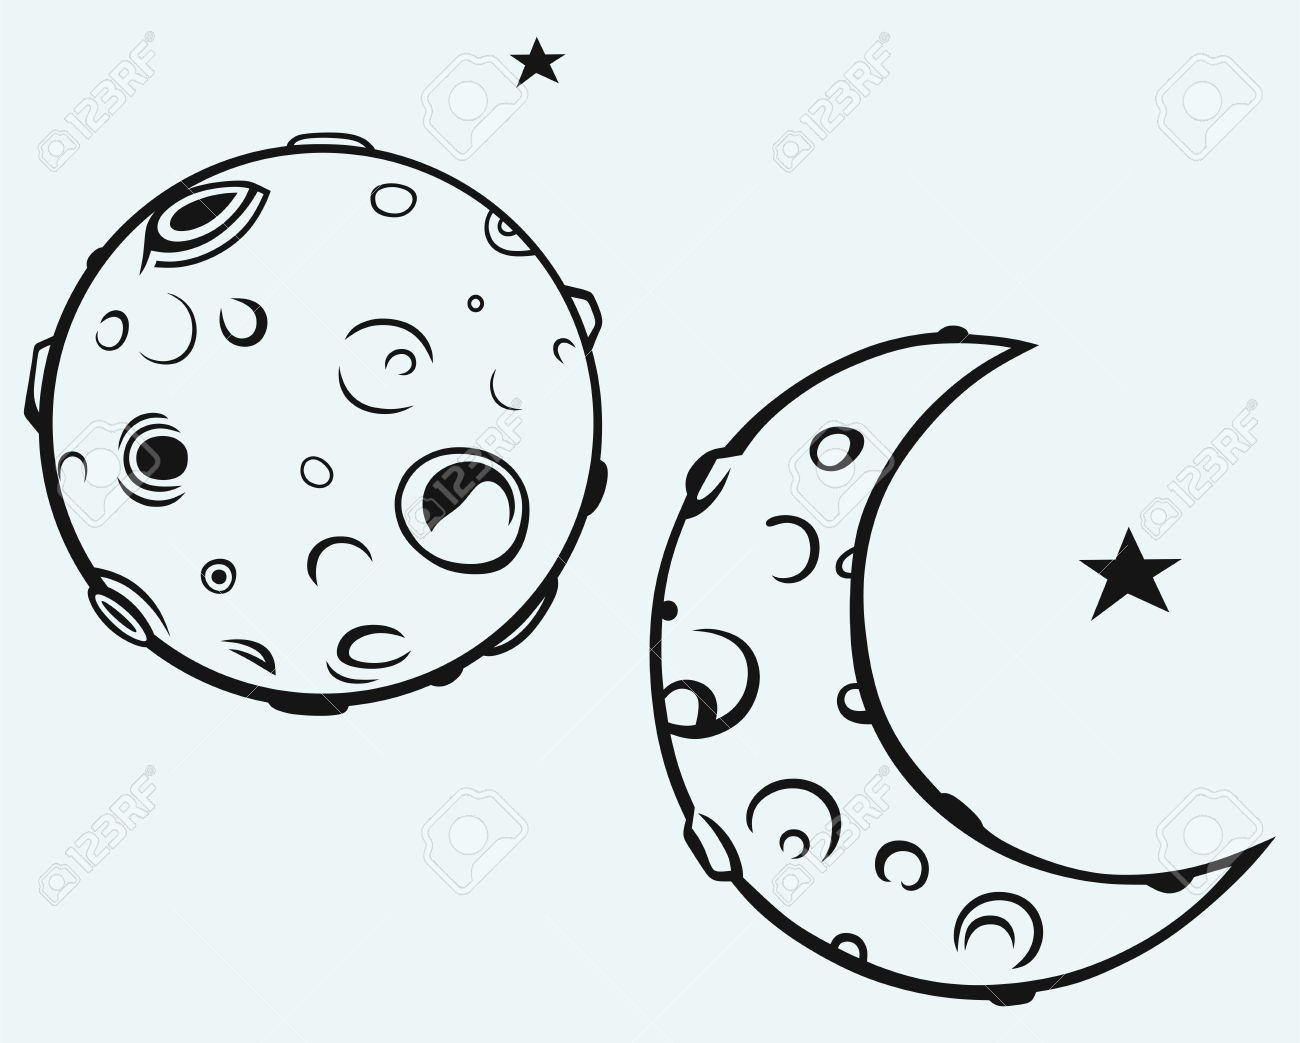 moon crater clipart - photo #34